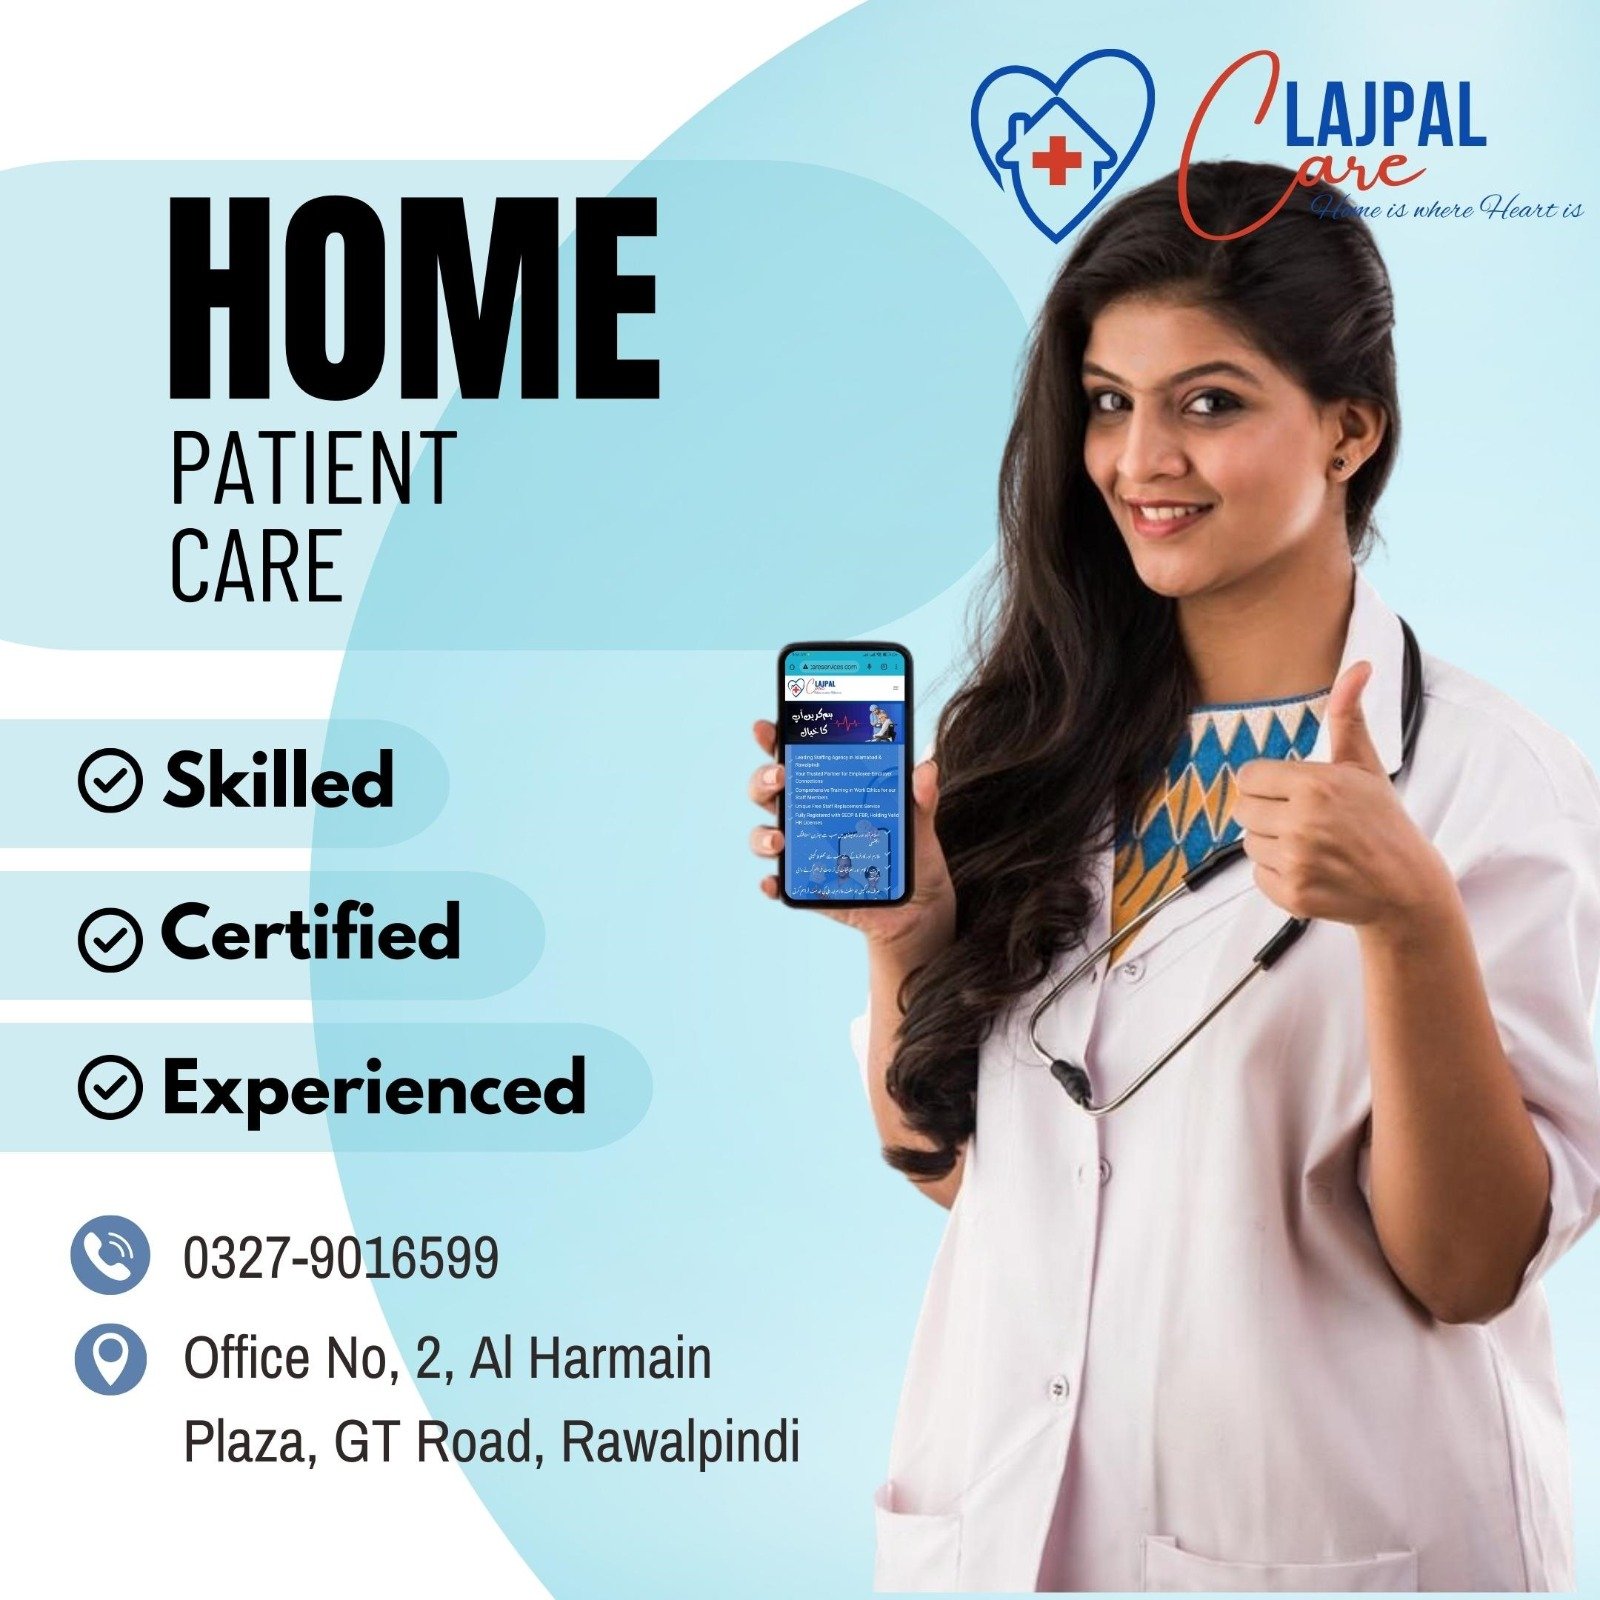 Home Nurse Services - Bringing Health and Comfort to Your Door